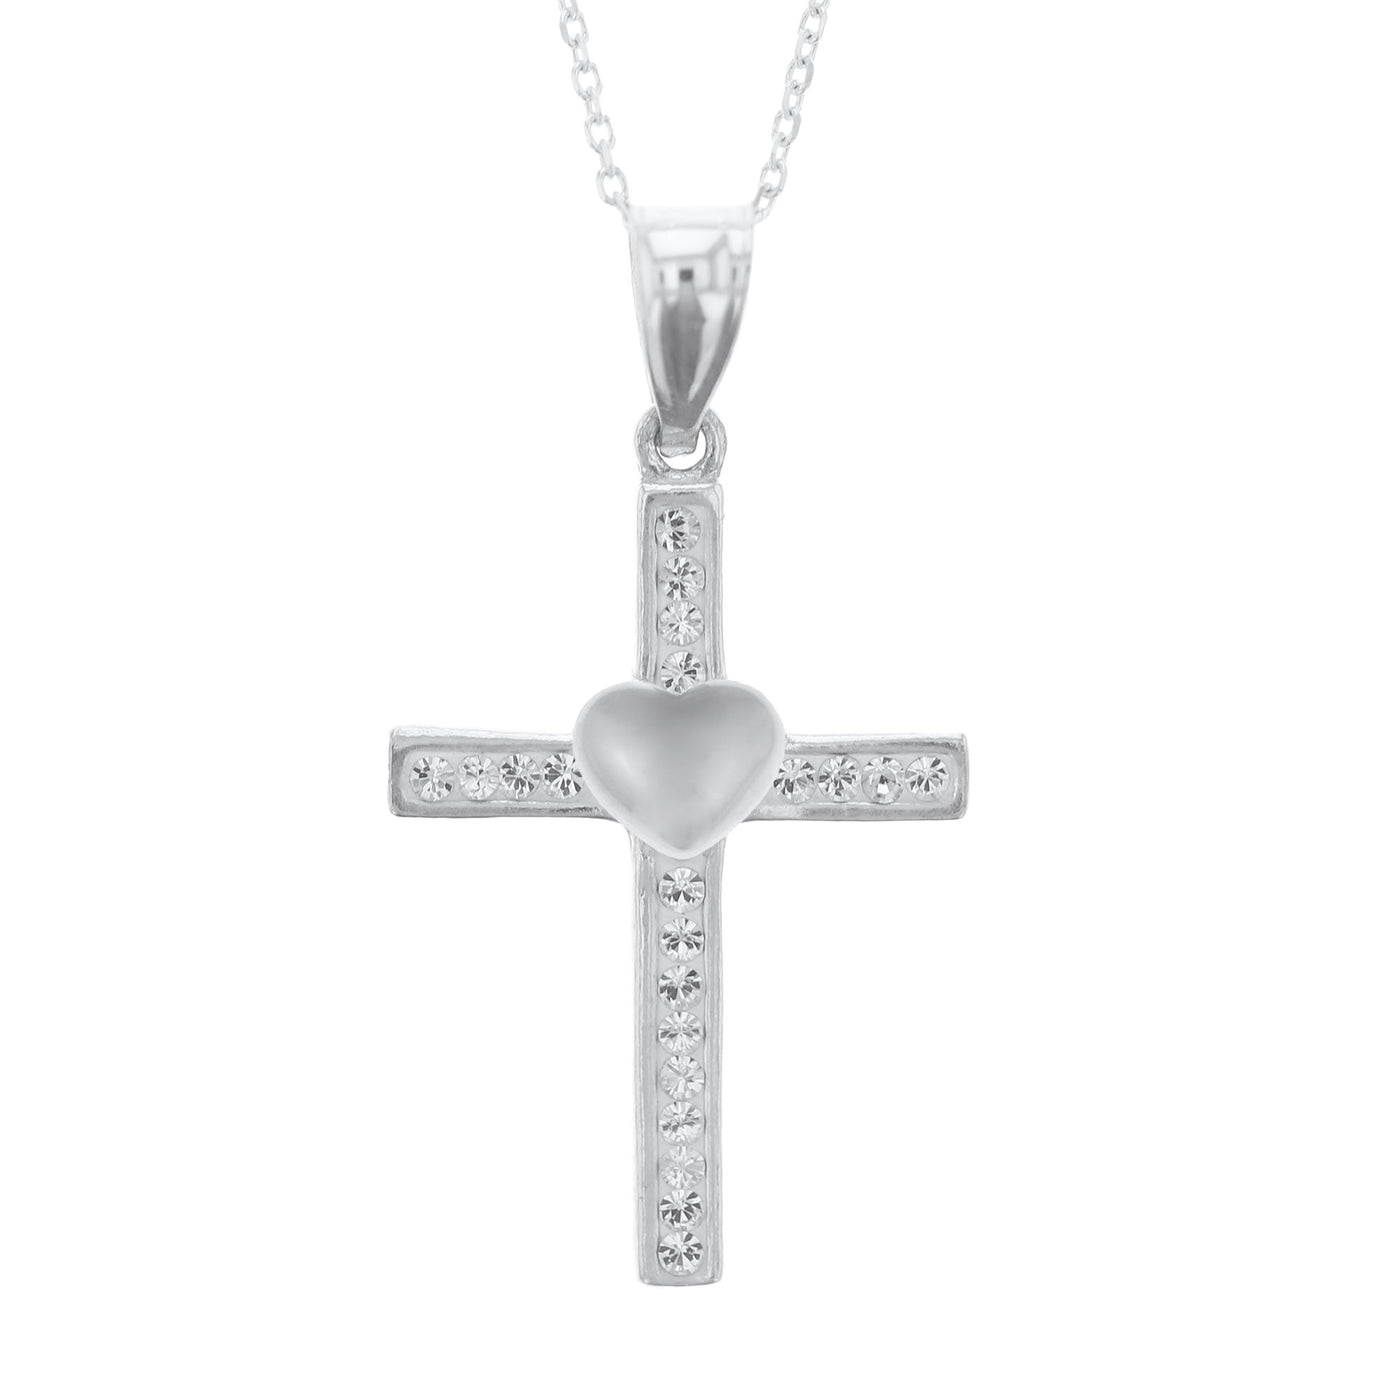 Rebecca Sloane Sterling Silver Crystal Cross with Heart Necklace